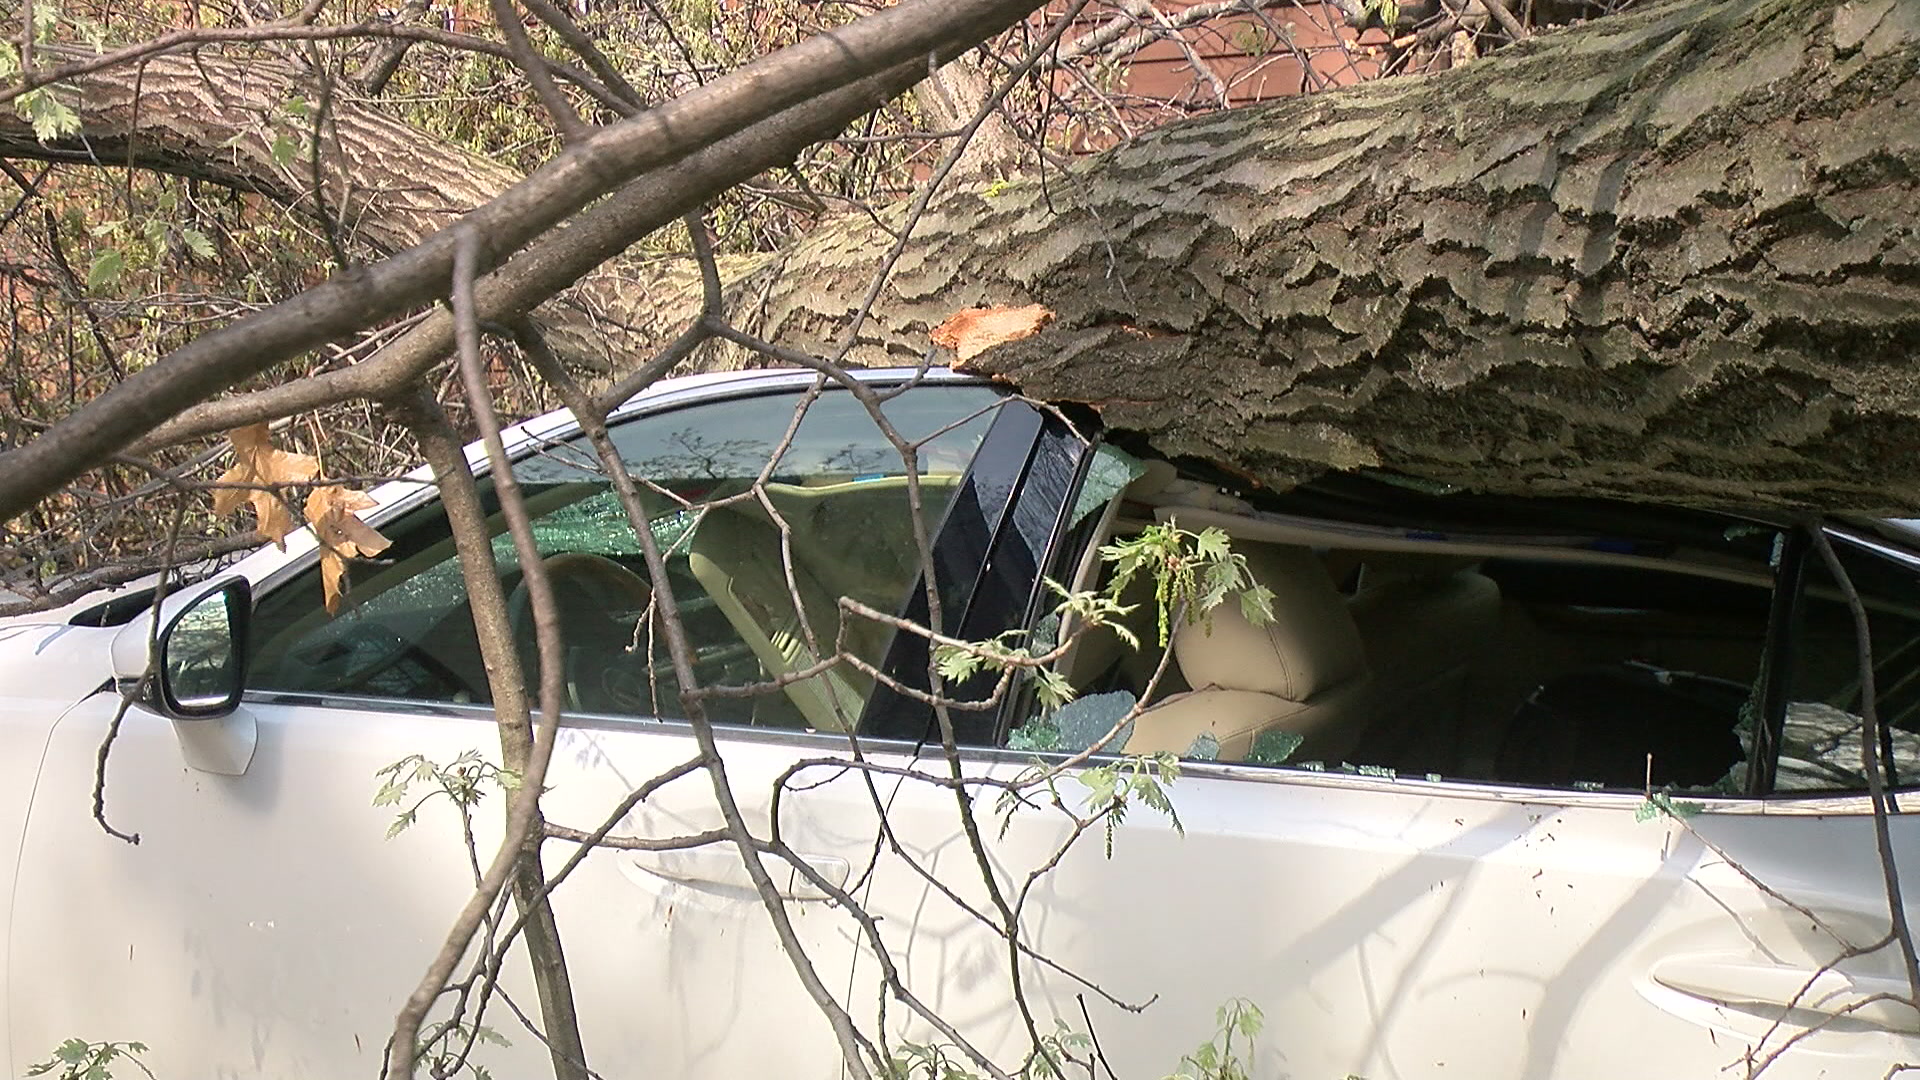 Metro Homeowners With Storm Damage And Debris Struggle To Find Help